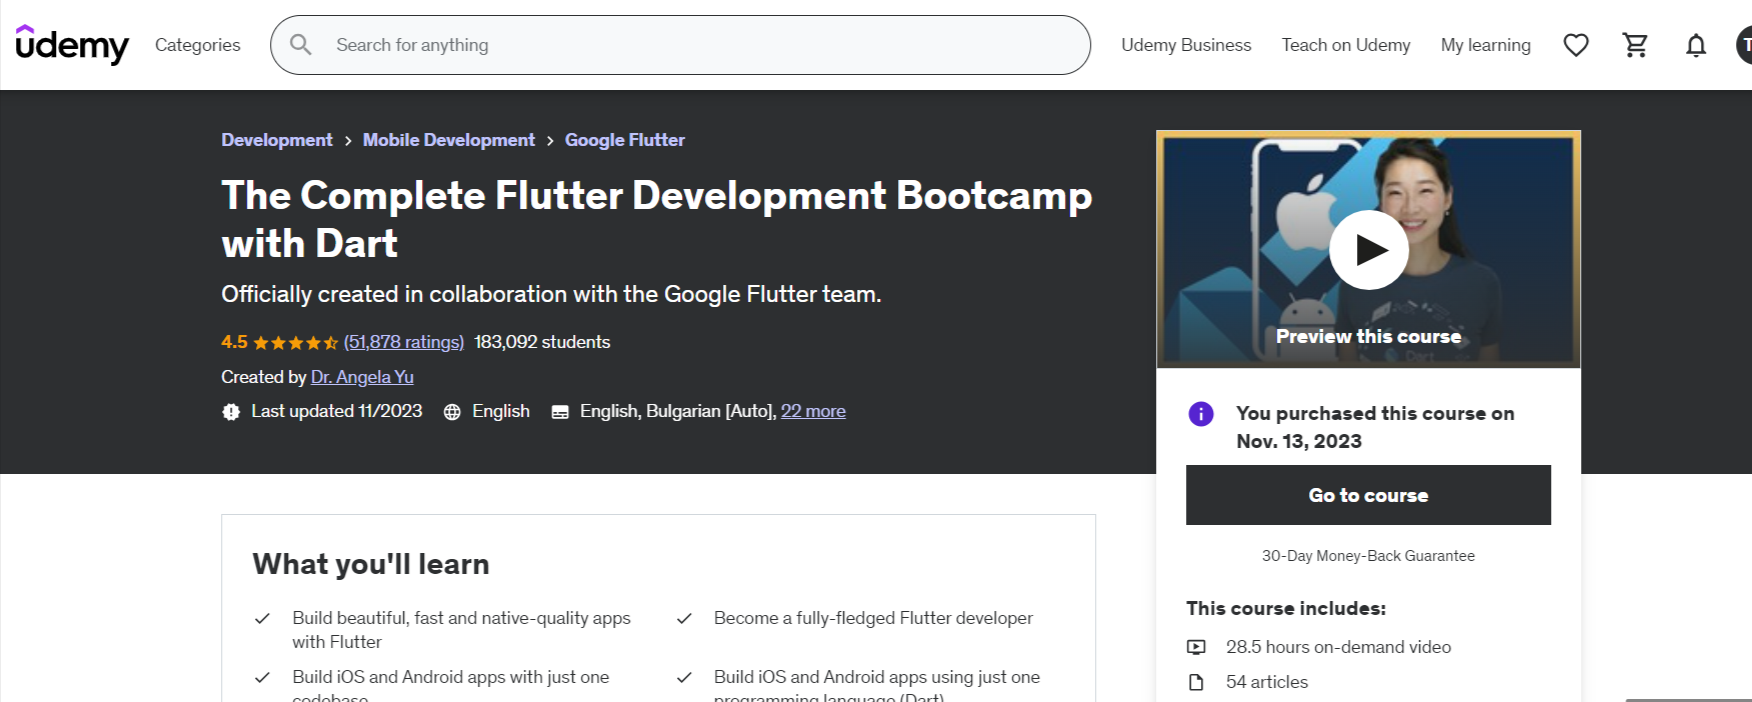 The Complete Flutter Development Bootcamp with Dart _ Udemy.png